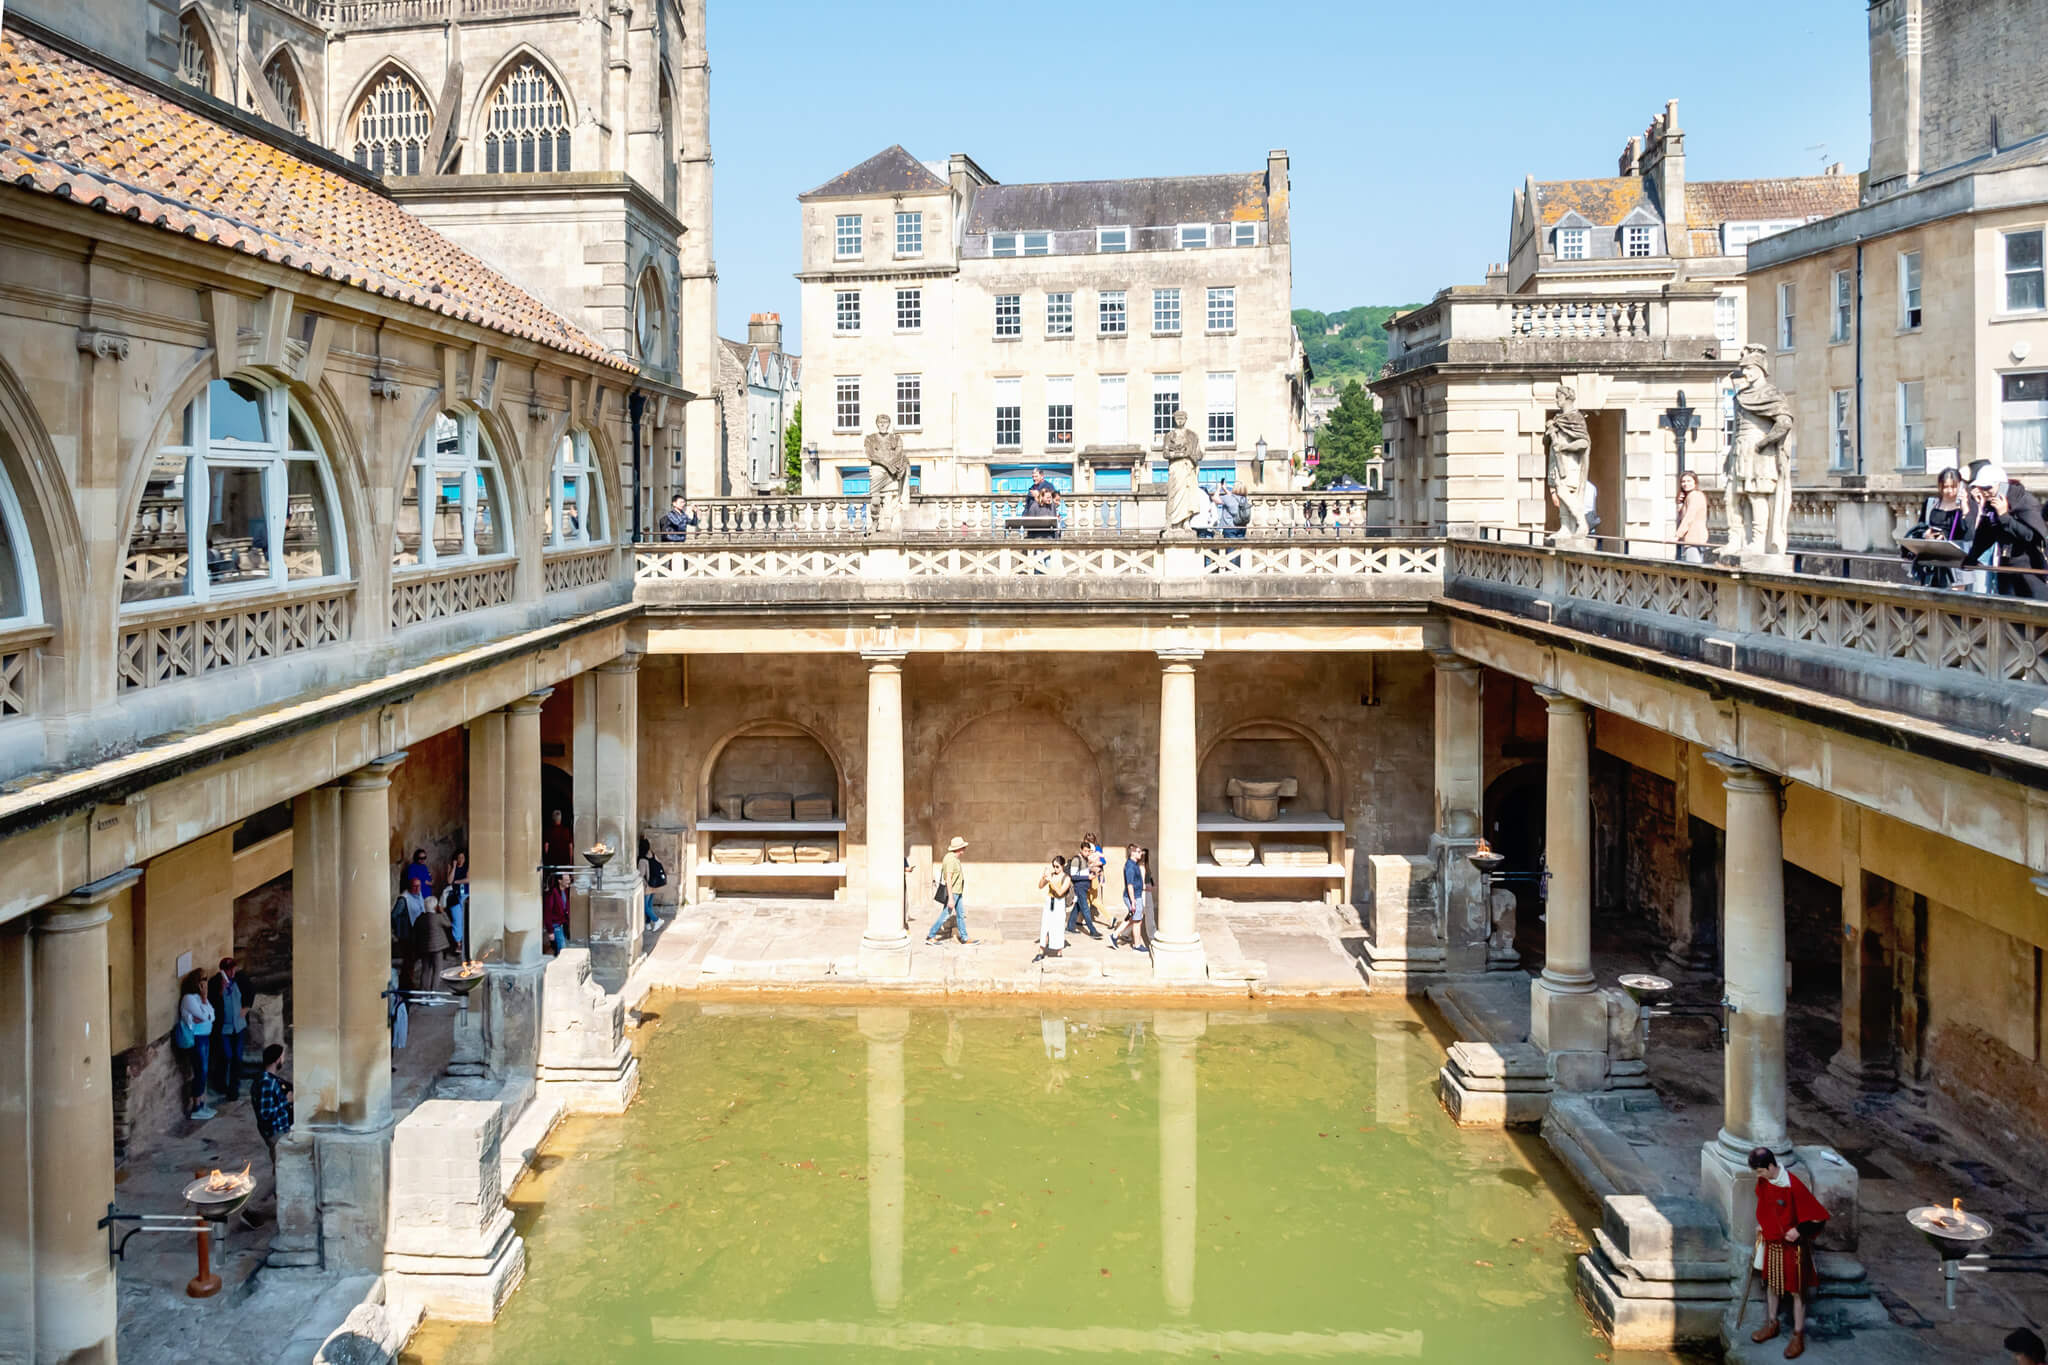 ancient roman baths in Bath England with green water